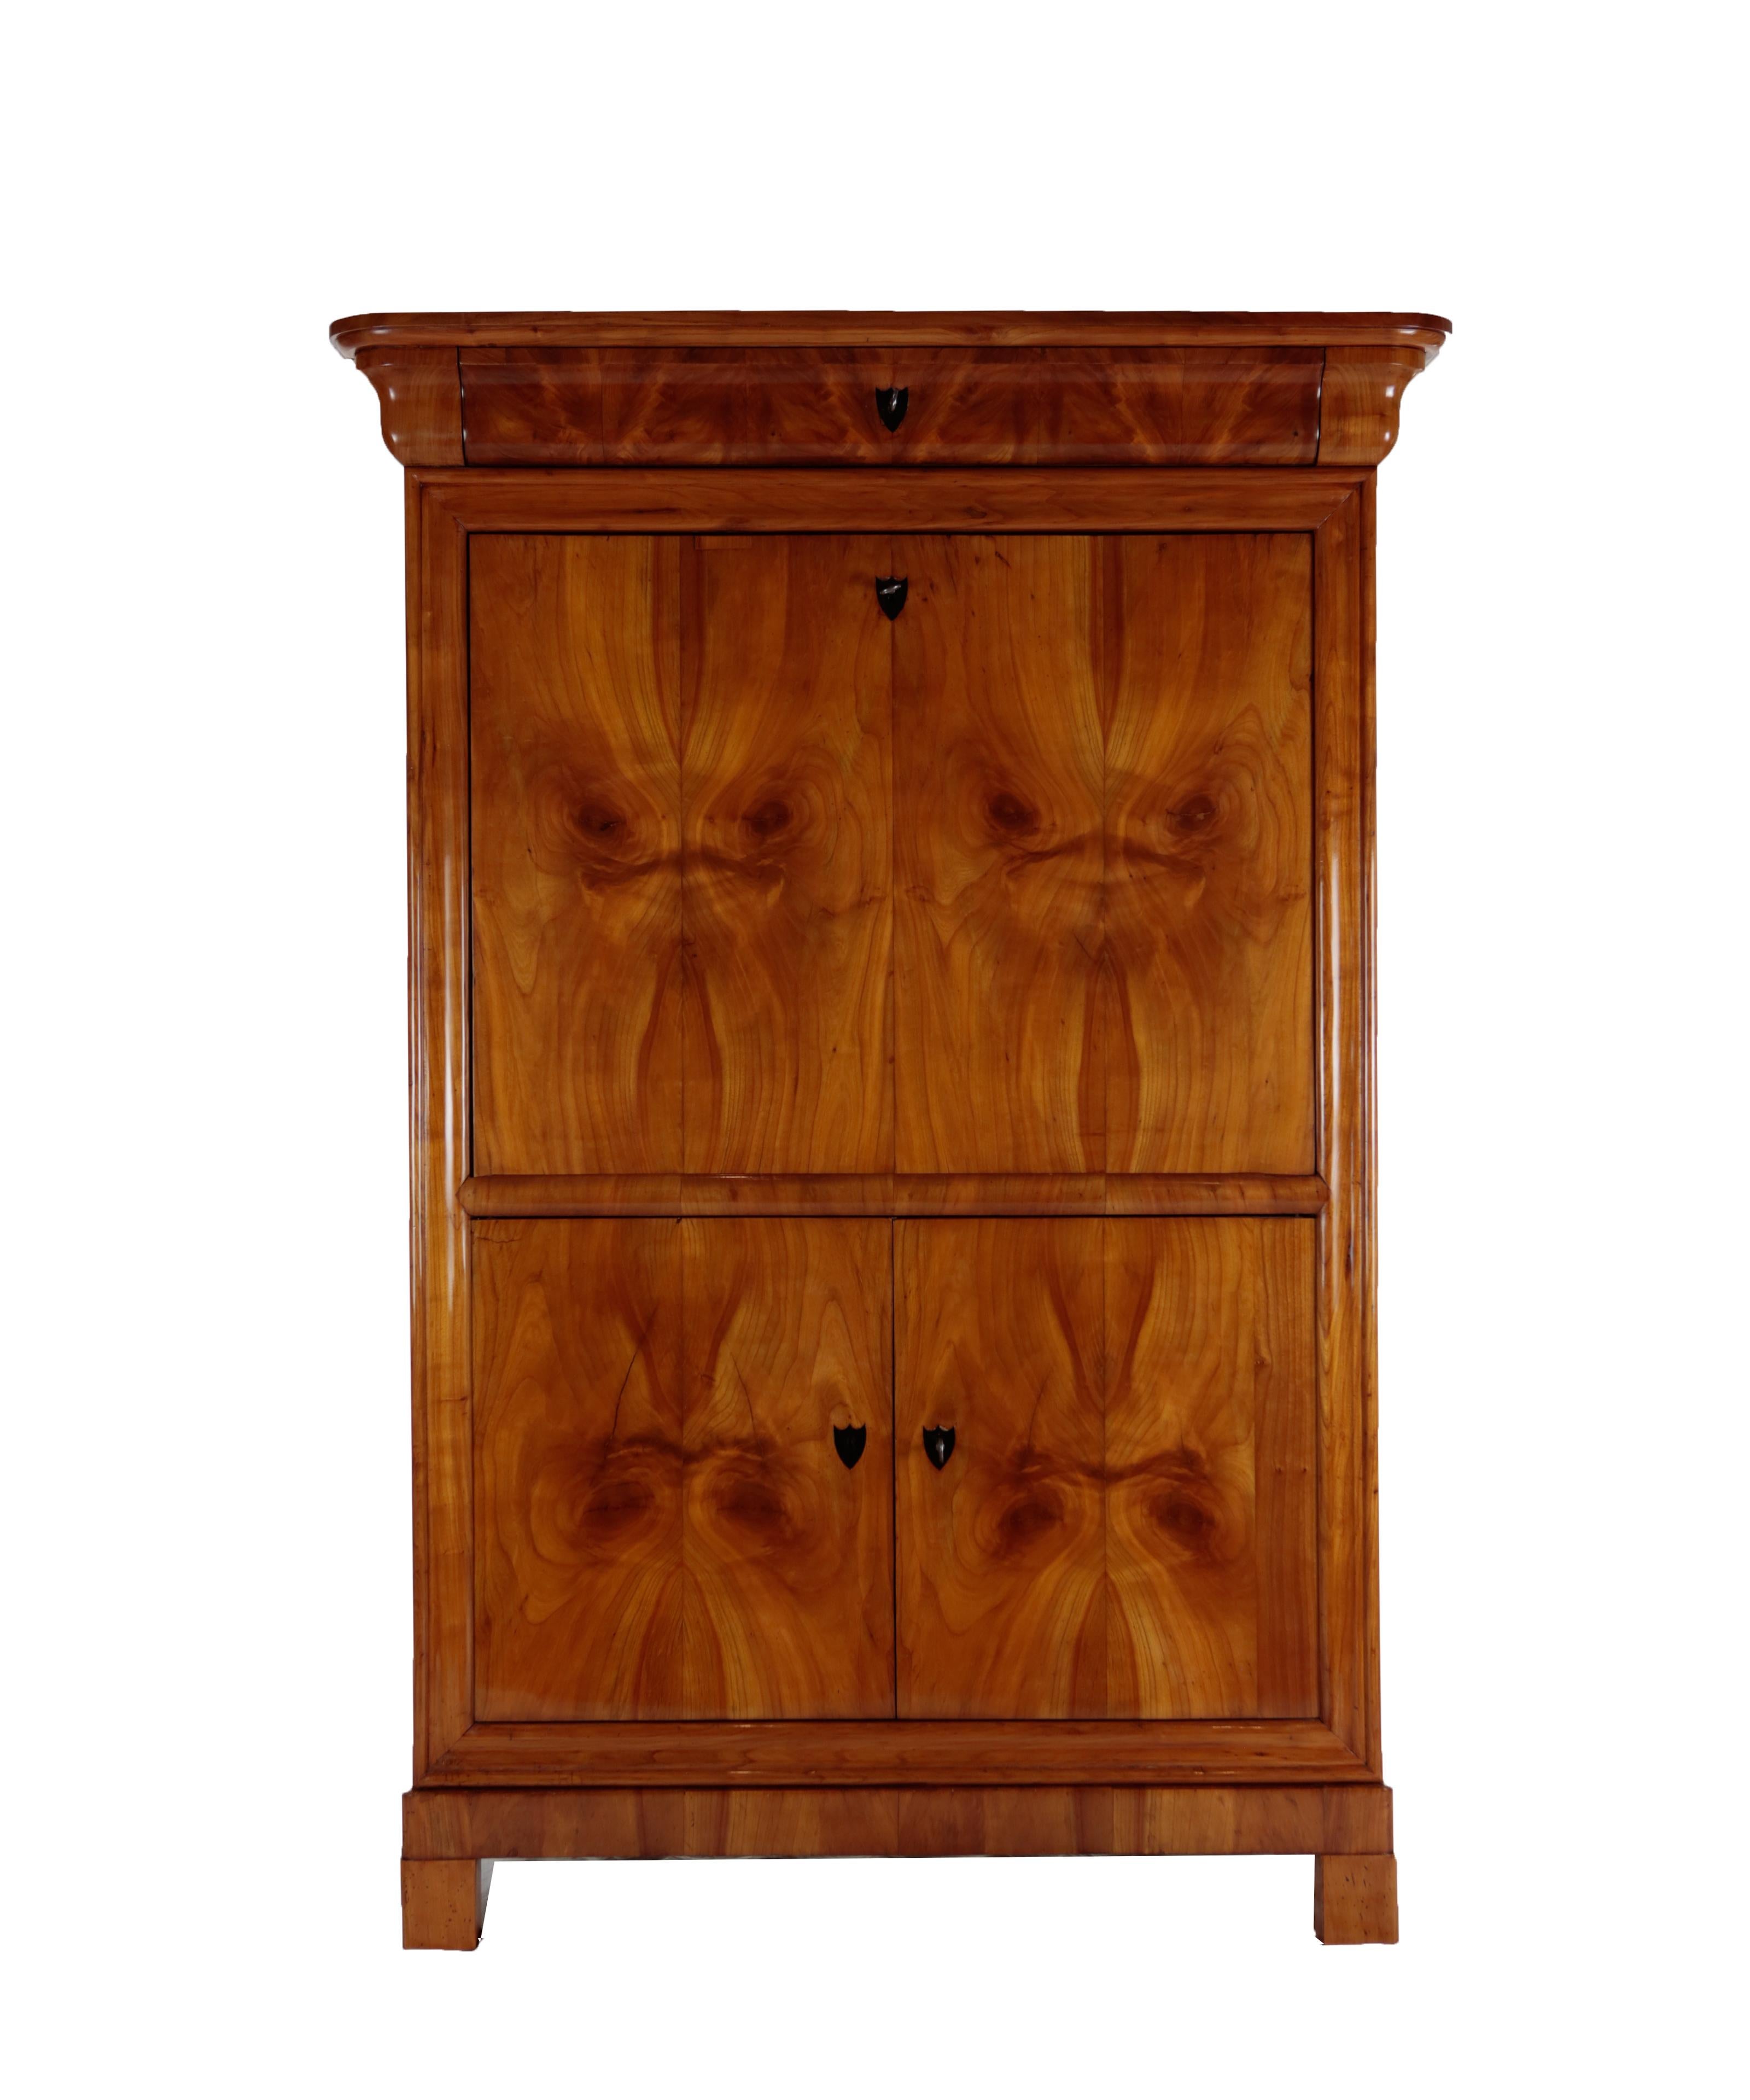 Secretary, circa 1830-1840
cherrywood veneer, rounded edges, beautifully bookmarked veneer
2 doors on the bottom, 1 drawer on the top,
small drawers with cherry veneer on the inside
Restored residential-ready state
French shellac hand